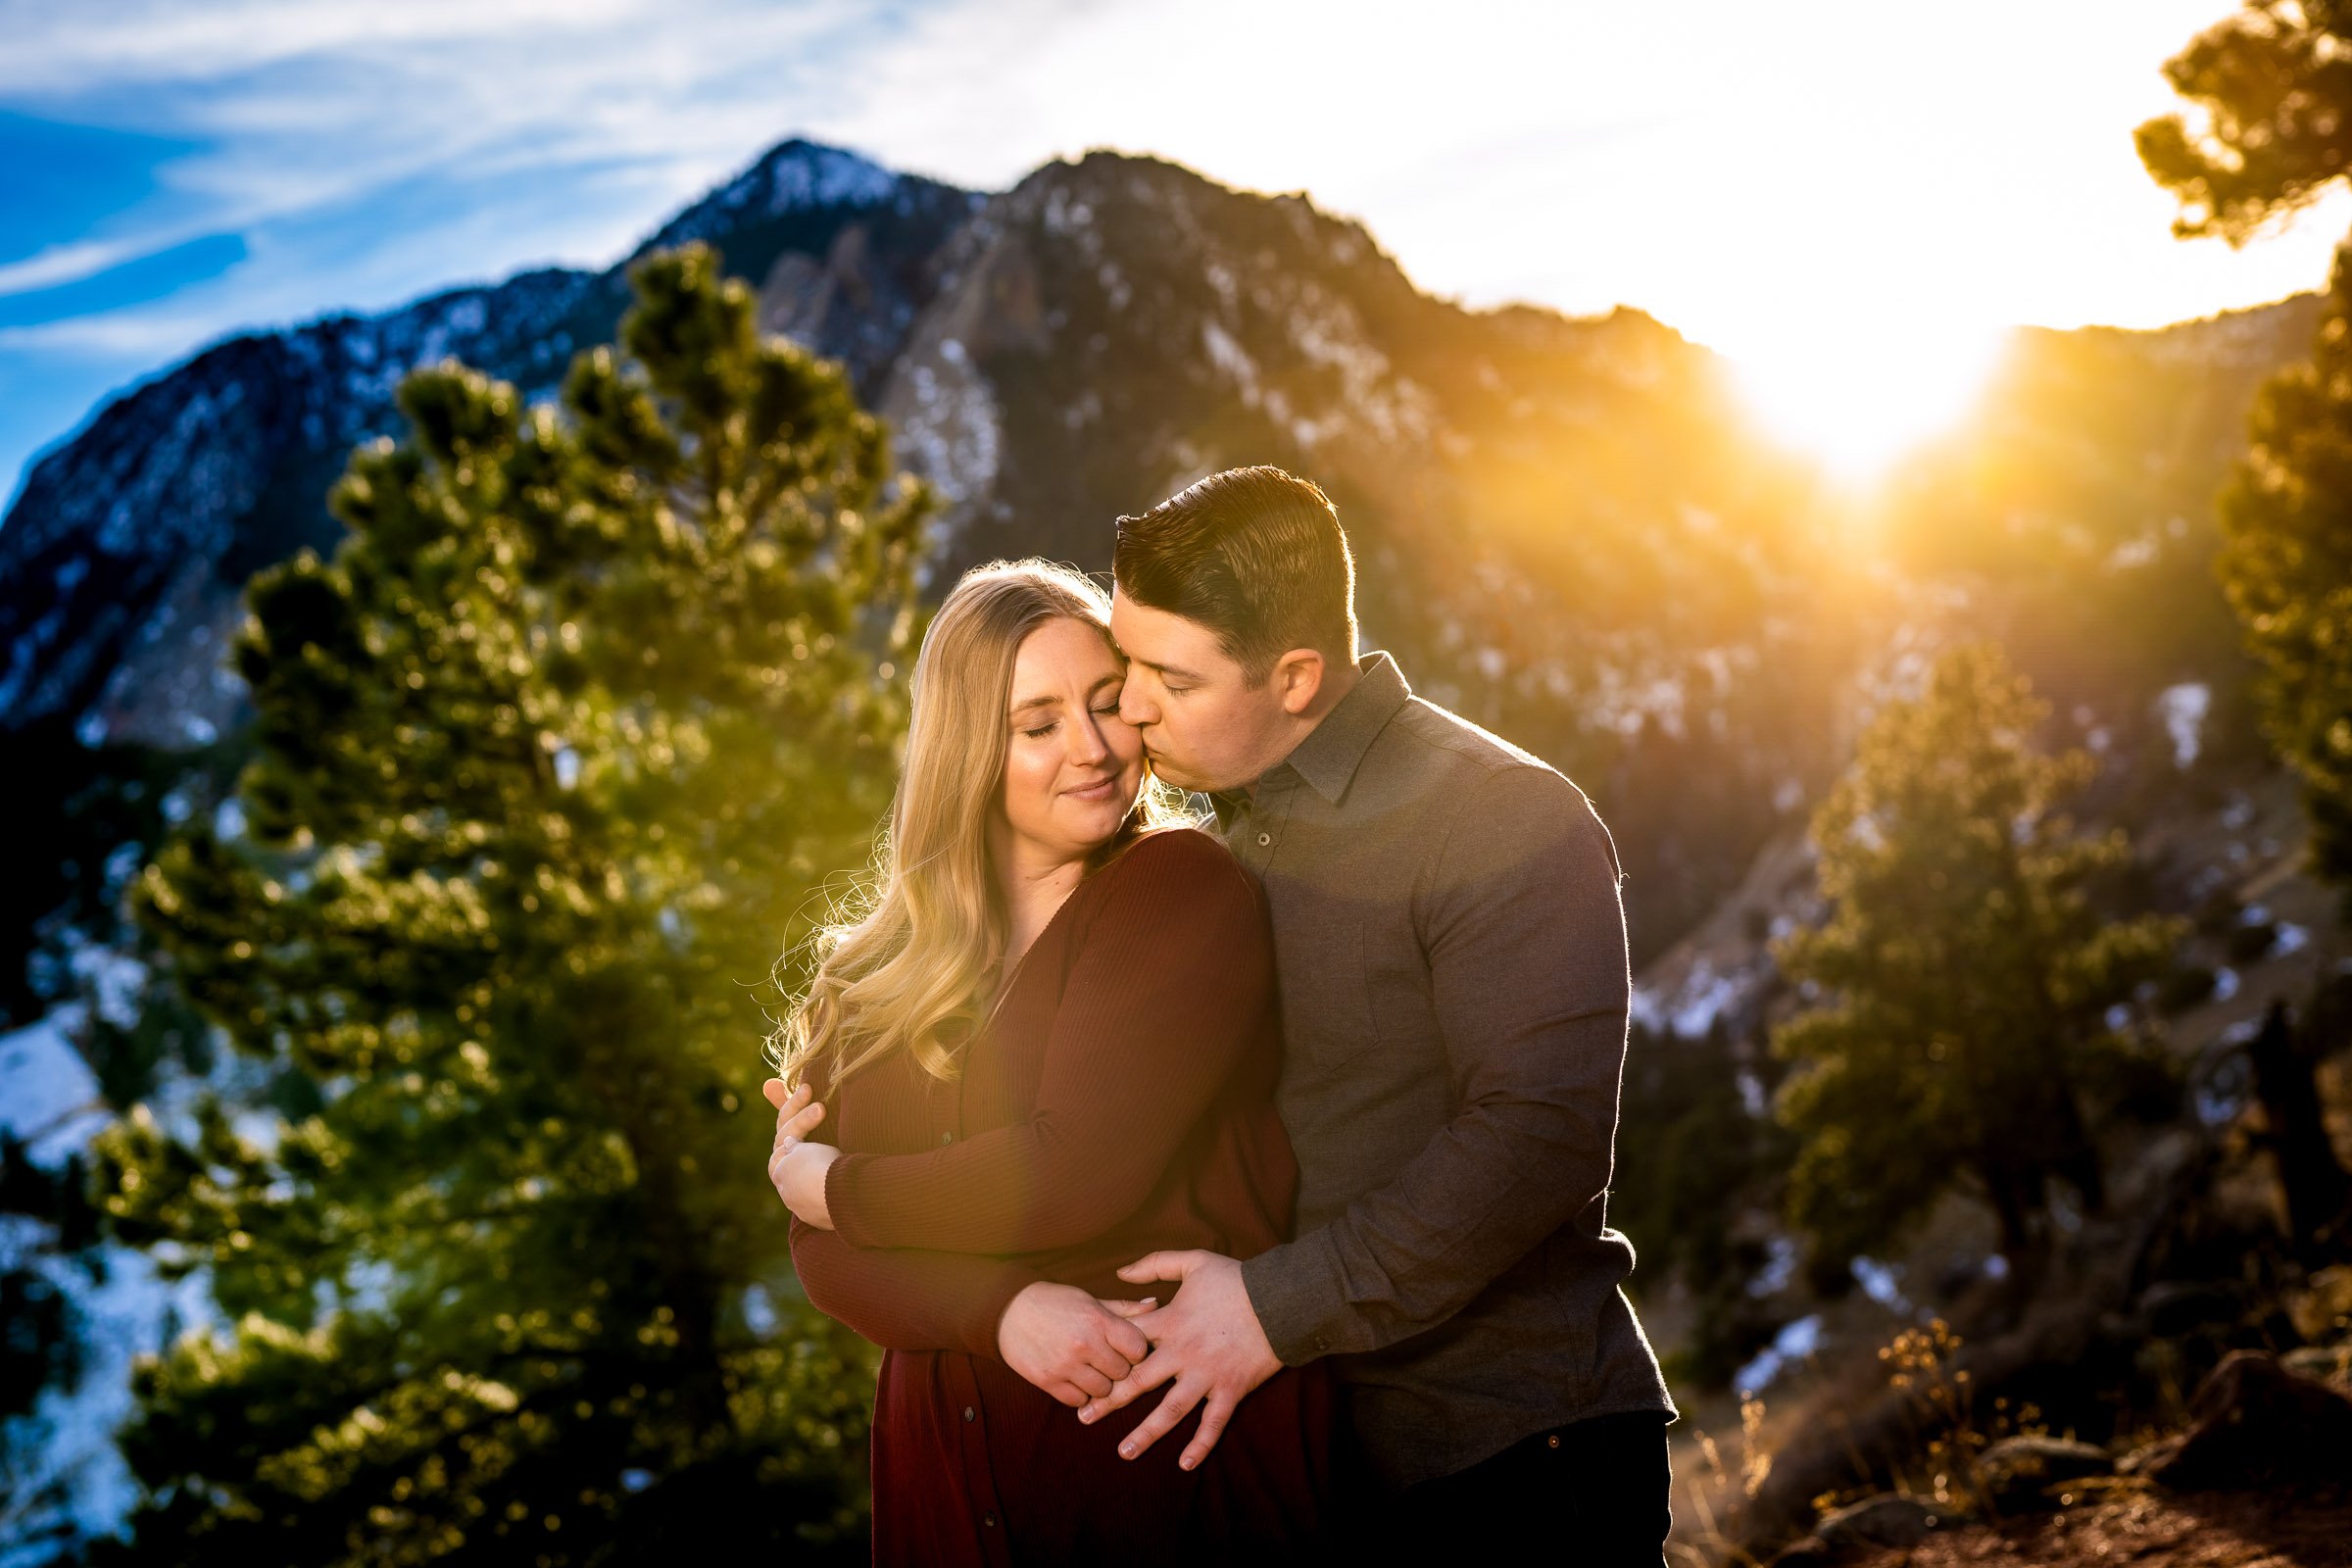 Engaged couple poses for portraits with the flatiron mountains in the background, Mountain Engagement Photos, Engagement Session, Engagement Photos, Engagement Photos Inspiration, Engagement Photography, Engagement Photographer, Engagement Portraits, Winter Engagement Photos, Snow Engagement Photos, Boulder engagement session, Boulder engagement photos, Boulder engagement photography, Boulder engagement photographer, Boulder engagement inspiration, NCAR Trail engagement session, NCAR Trail engagement photos, NCAR Trail engagement photography, NCAR Trail engagement photographer, NCAR Trail engagement inspiration, Colorado engagement session, Colorado engagement photos, Colorado engagement photography, Colorado engagement photographer, Colorado engagement inspiration, Flatiron Engagement Photos, Chautauqua Engagement Photos